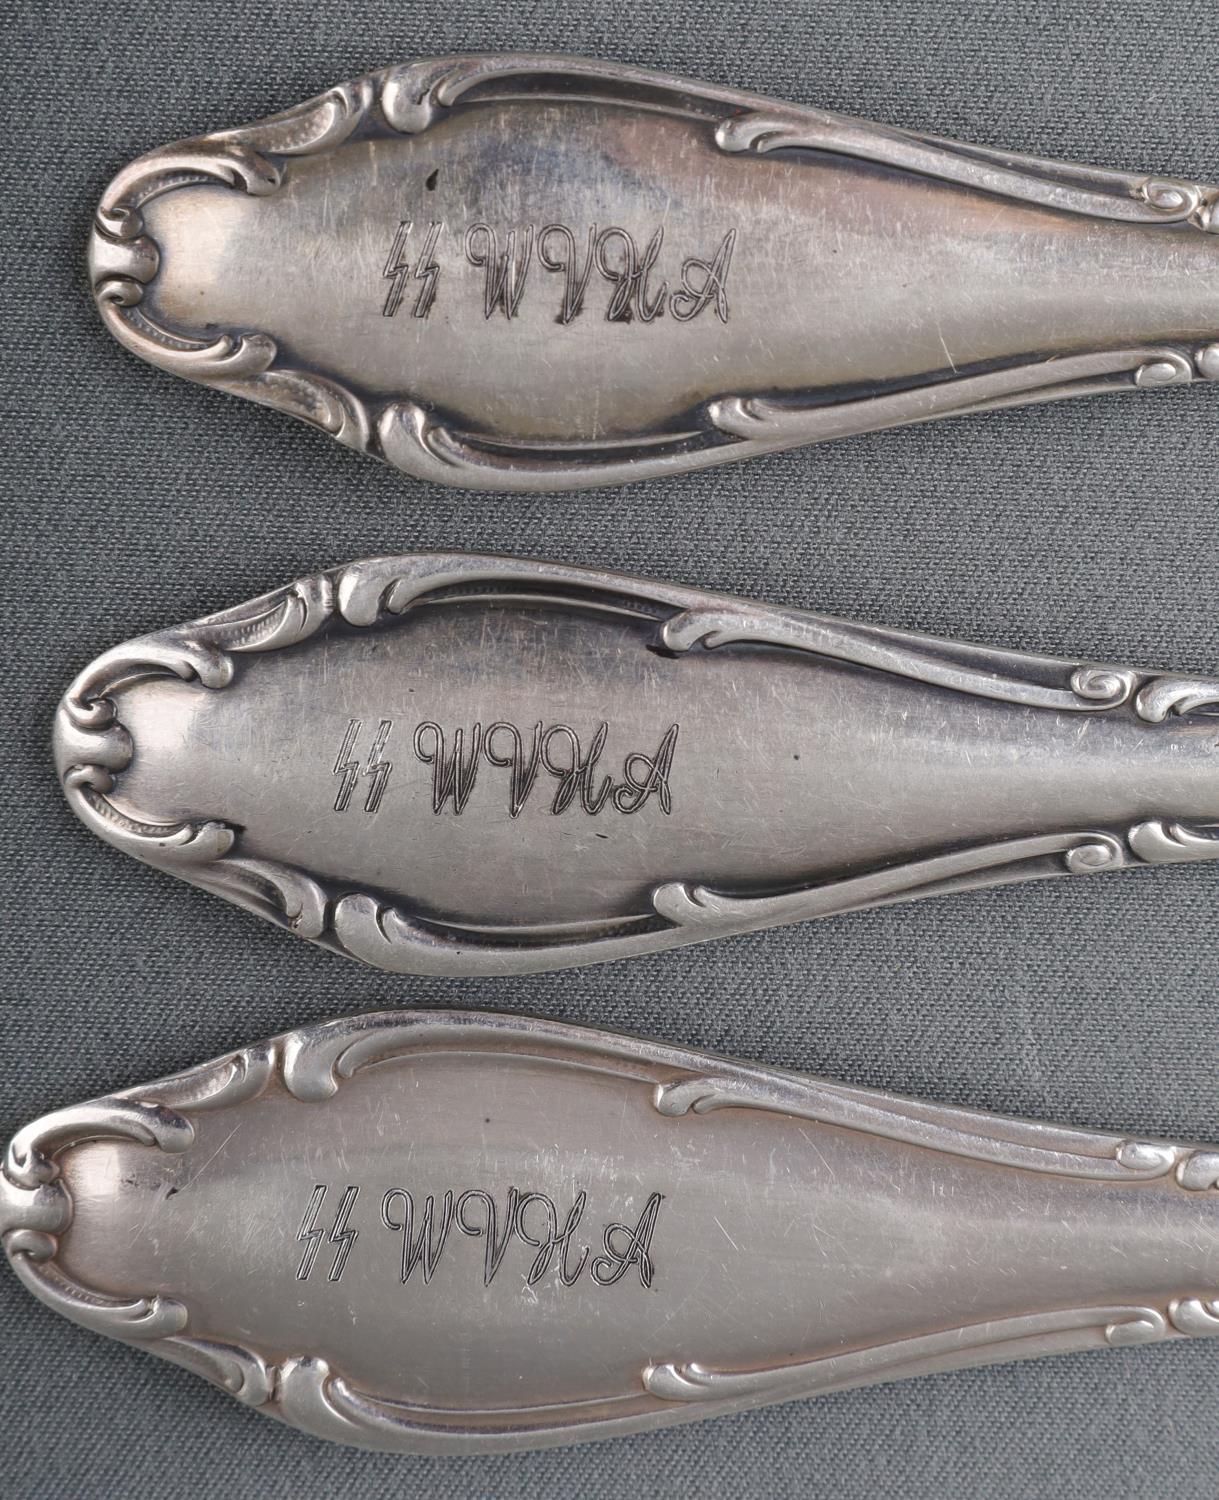 SS CAMP NEUNGAMME LAGER MESS SILVERWARE CUTLERY